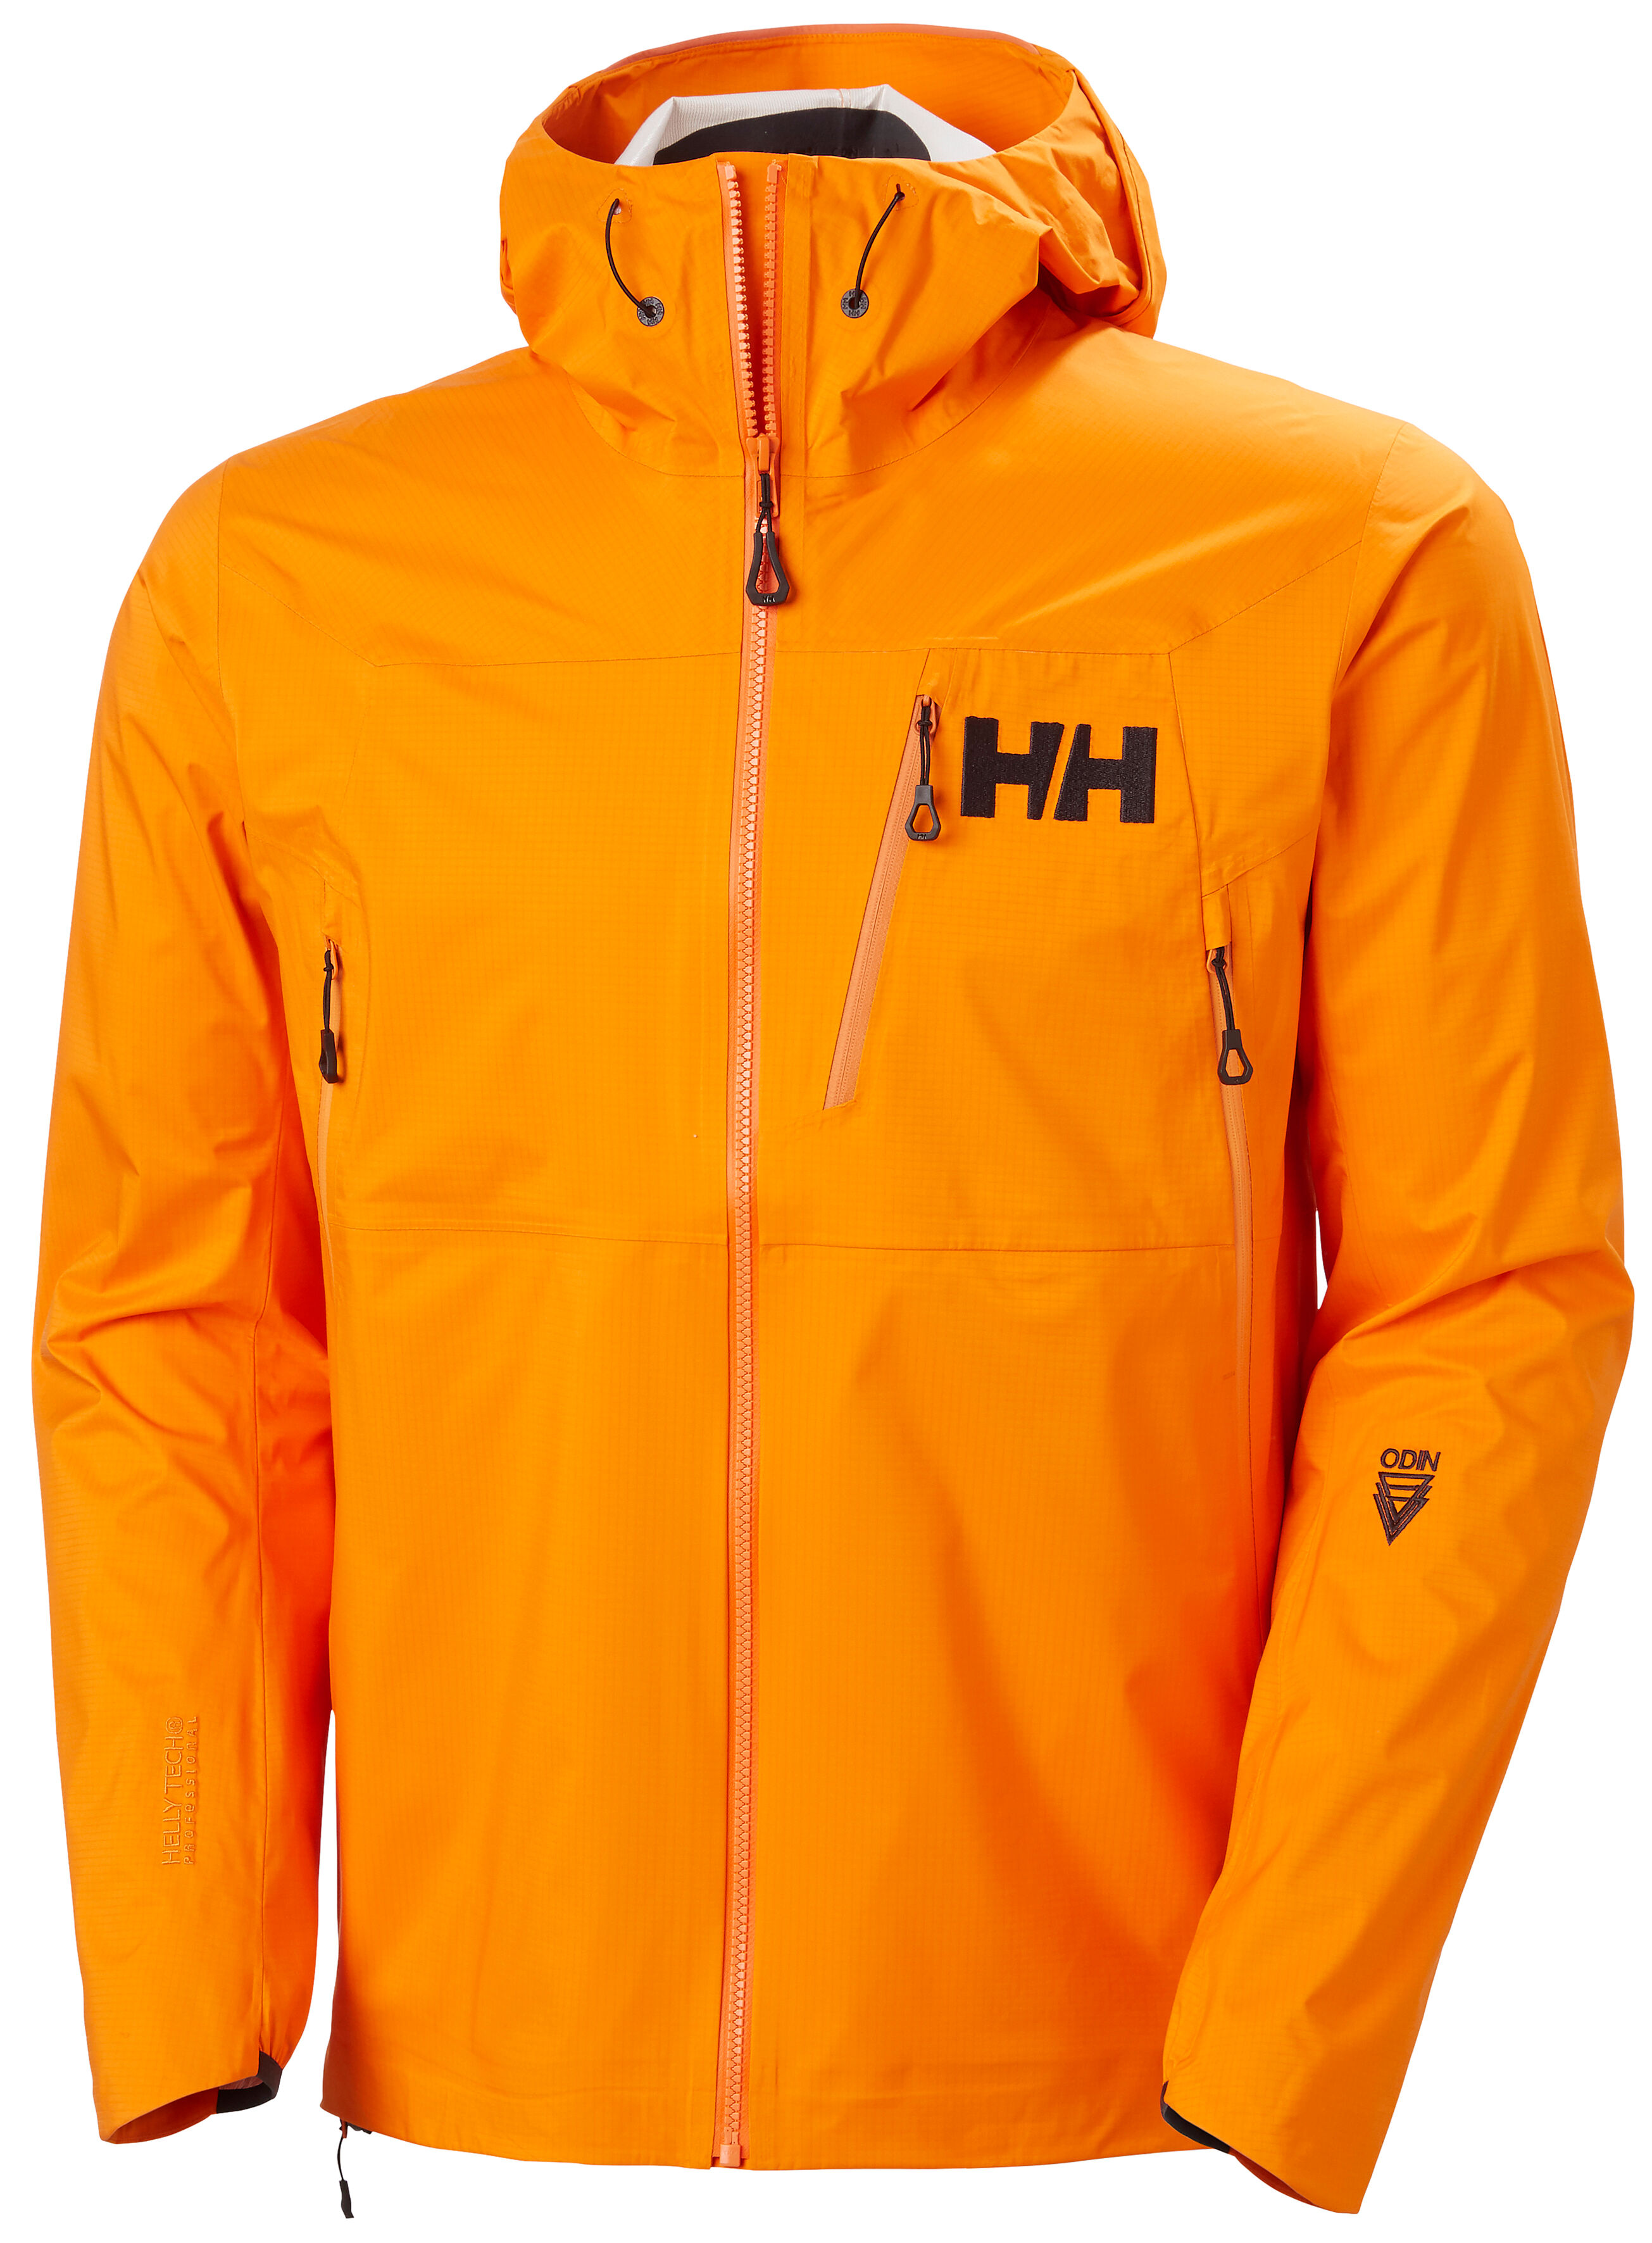 Helly Hansen Odin 3D Air Shell Jacket - Chaqueta impermeable - Hombre